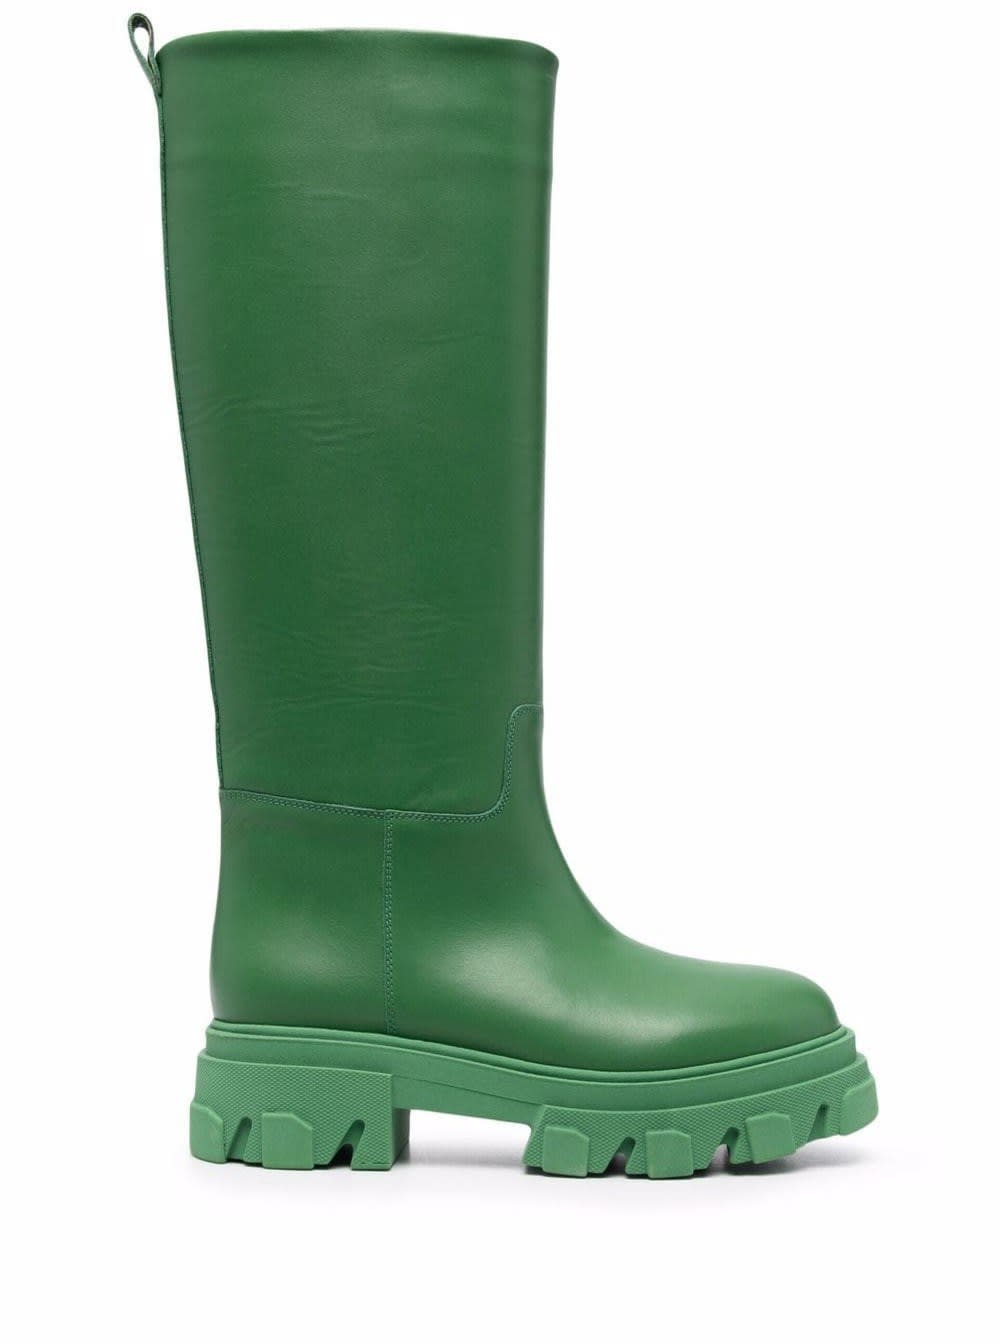 GIA BORGHINI Green Leather Boots With Logoed Sole